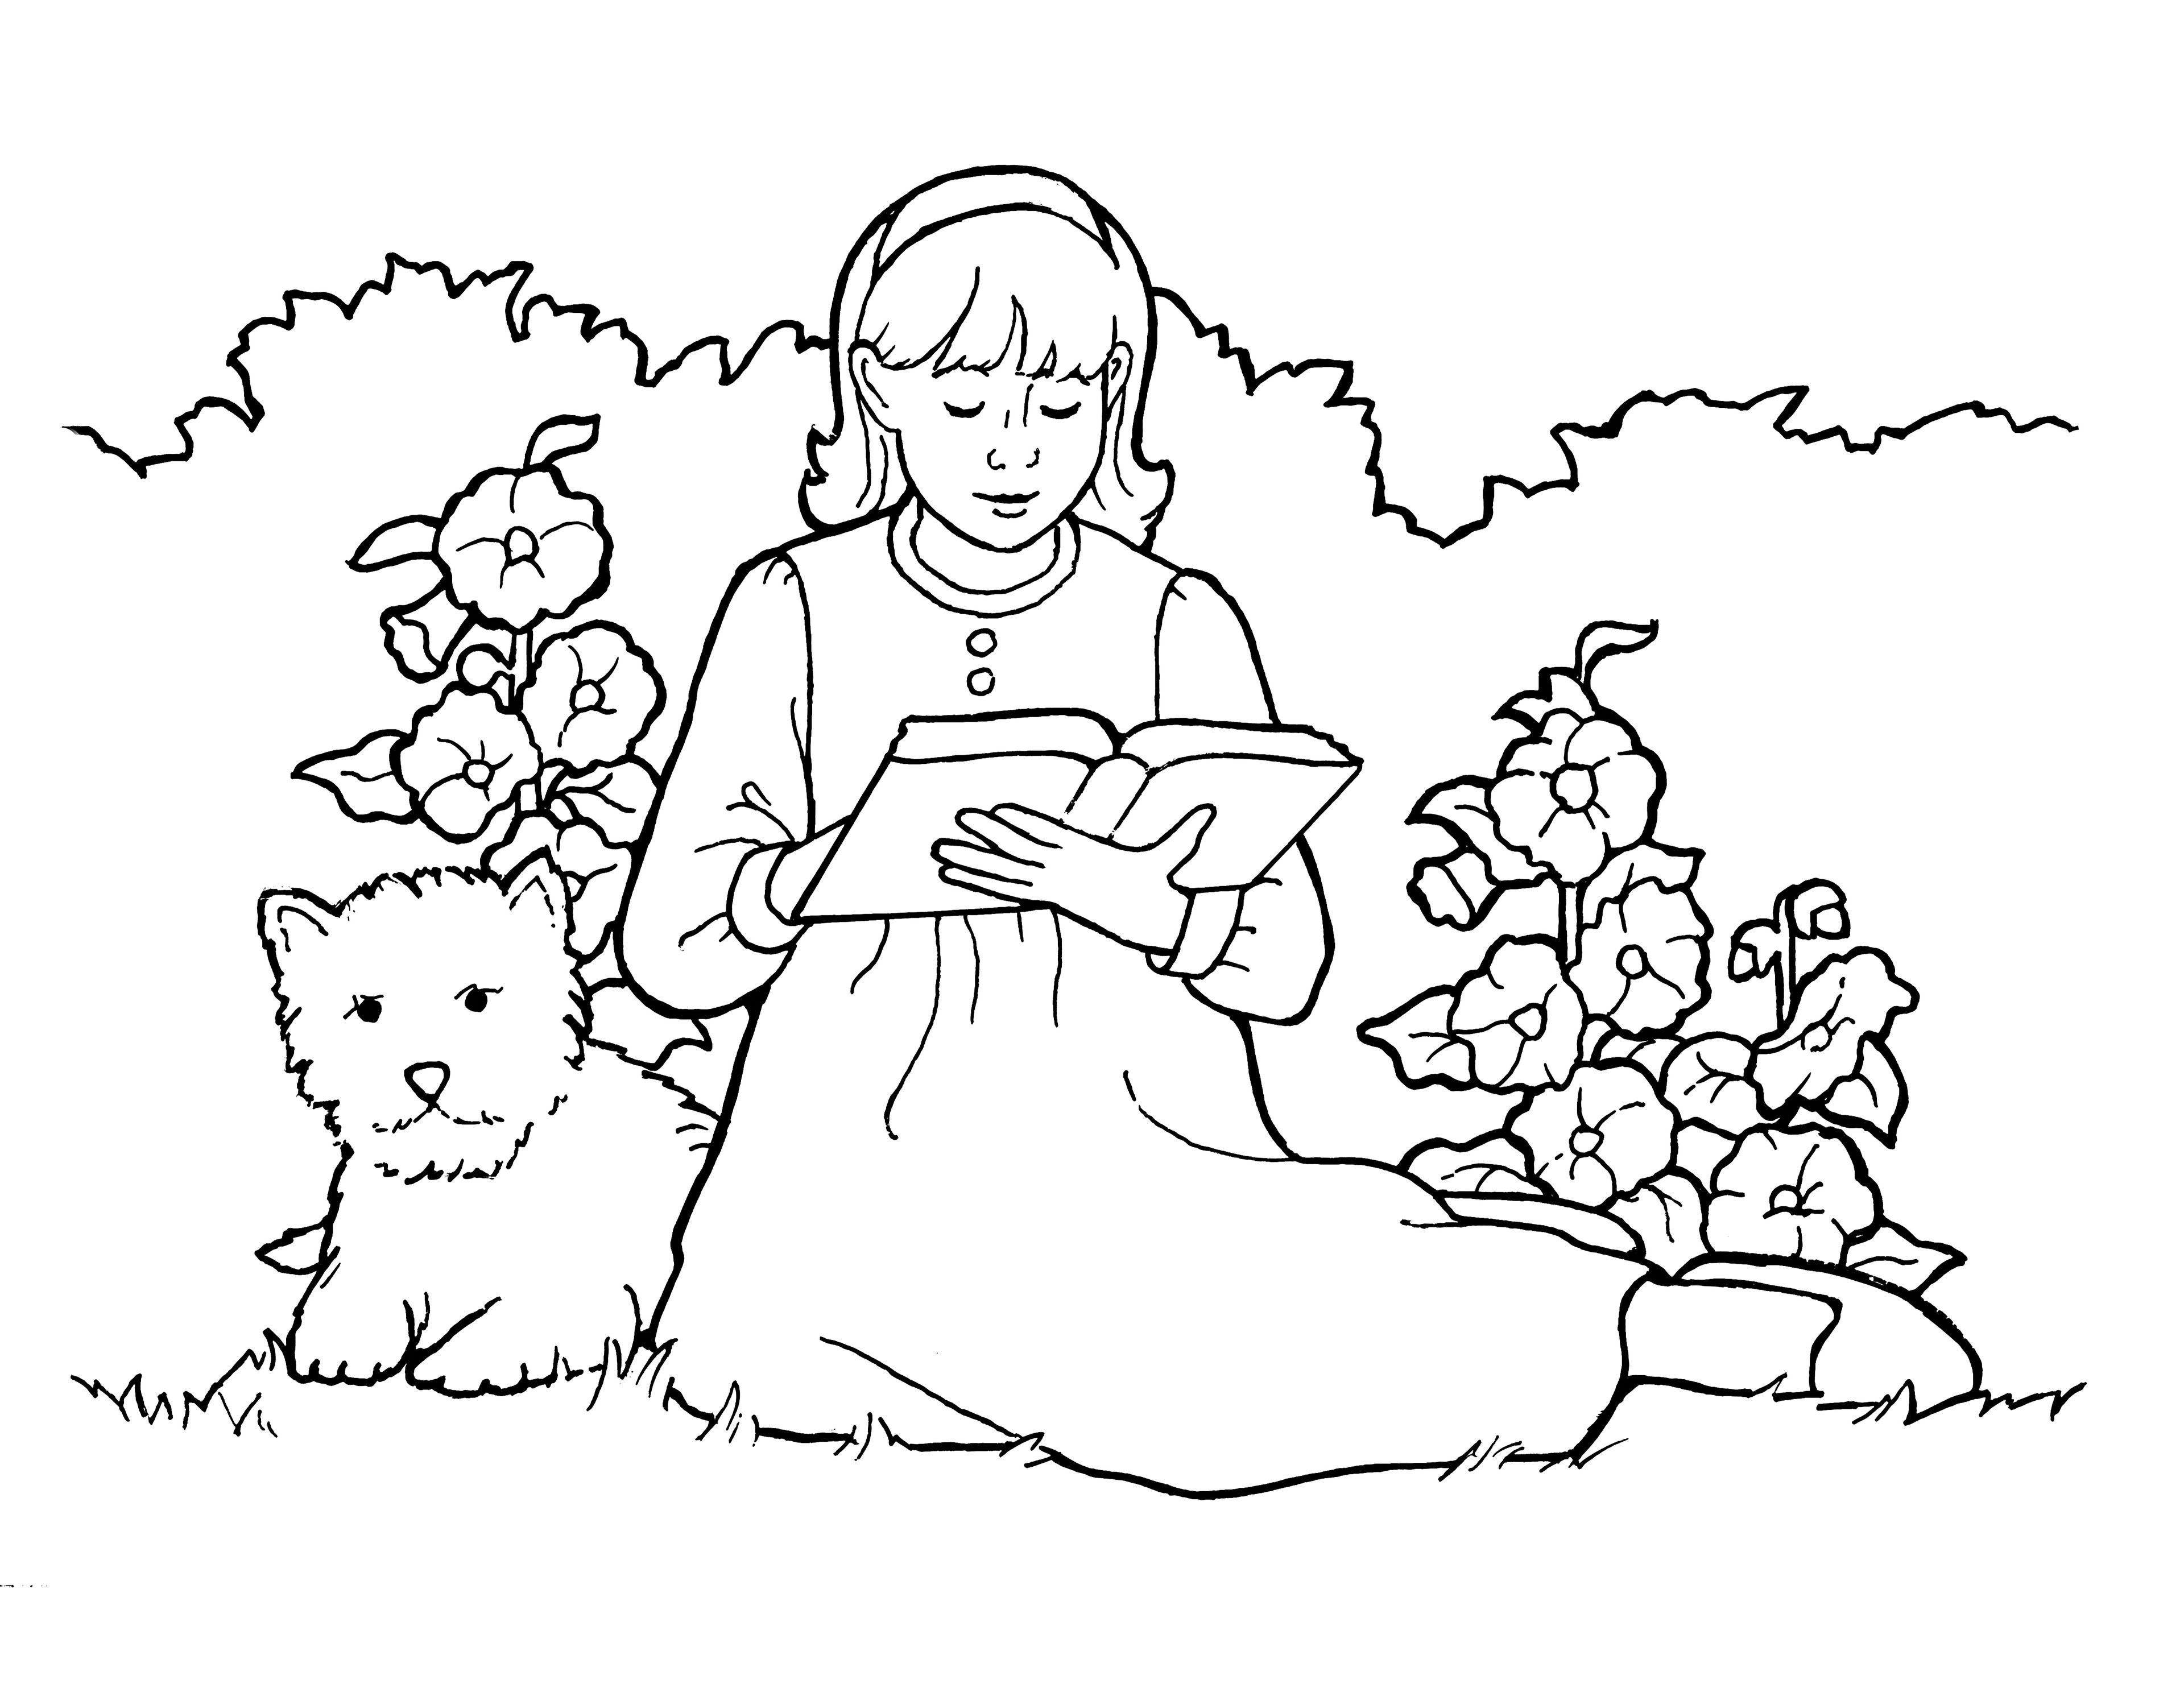 An illustration of a girl sitting in a garden, reading her scriptures.